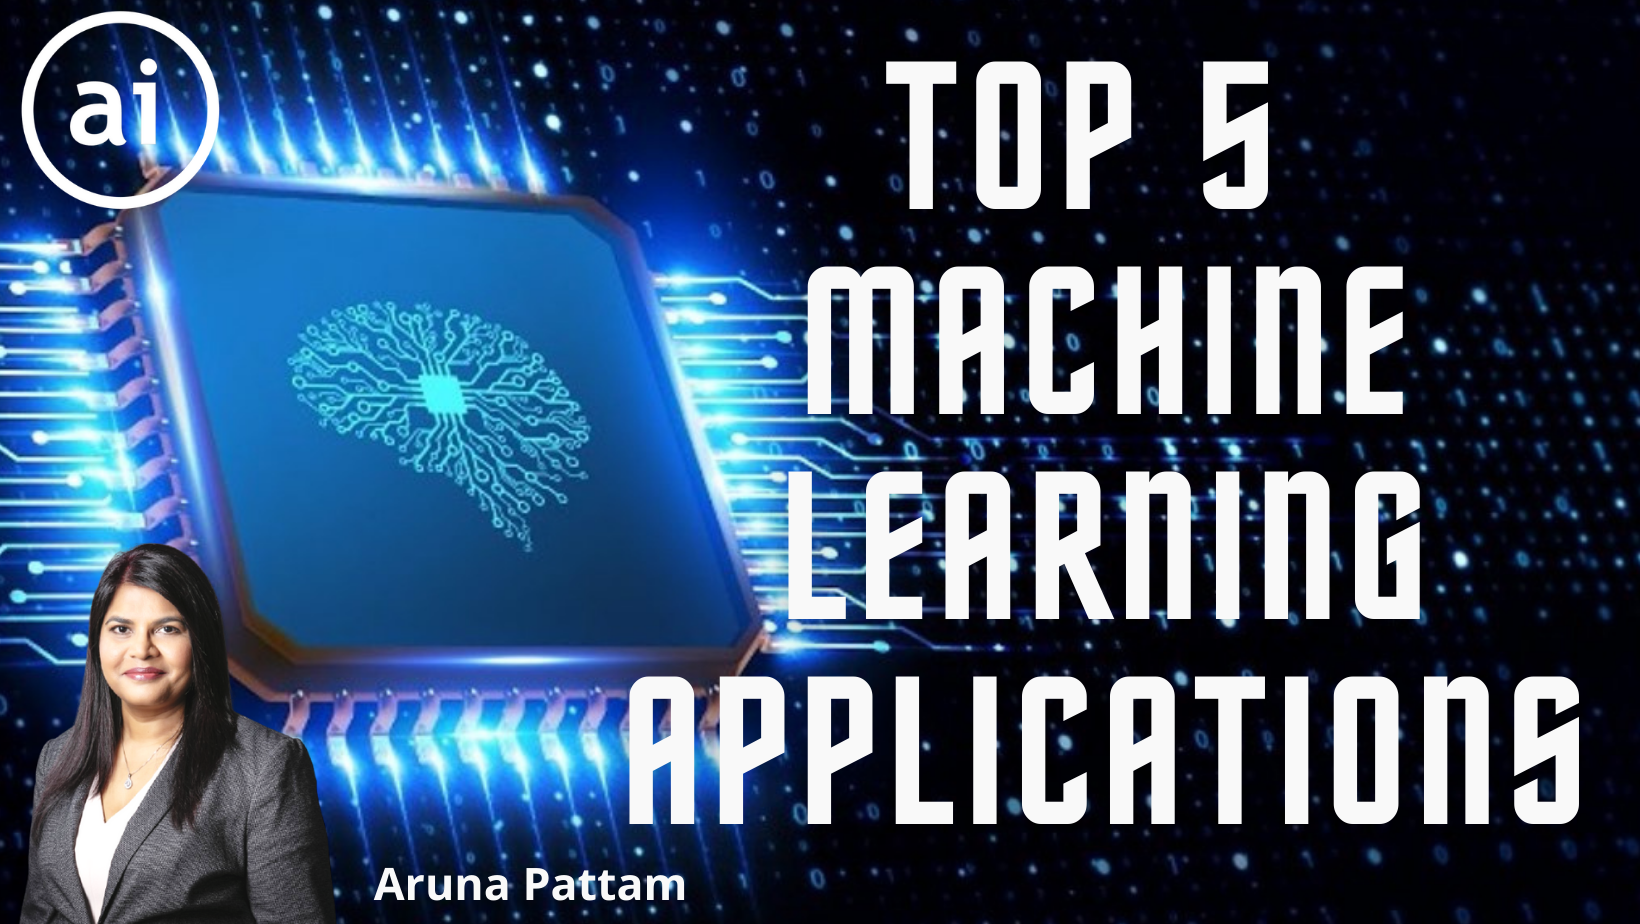 Top 5 Applications of Machine Learning